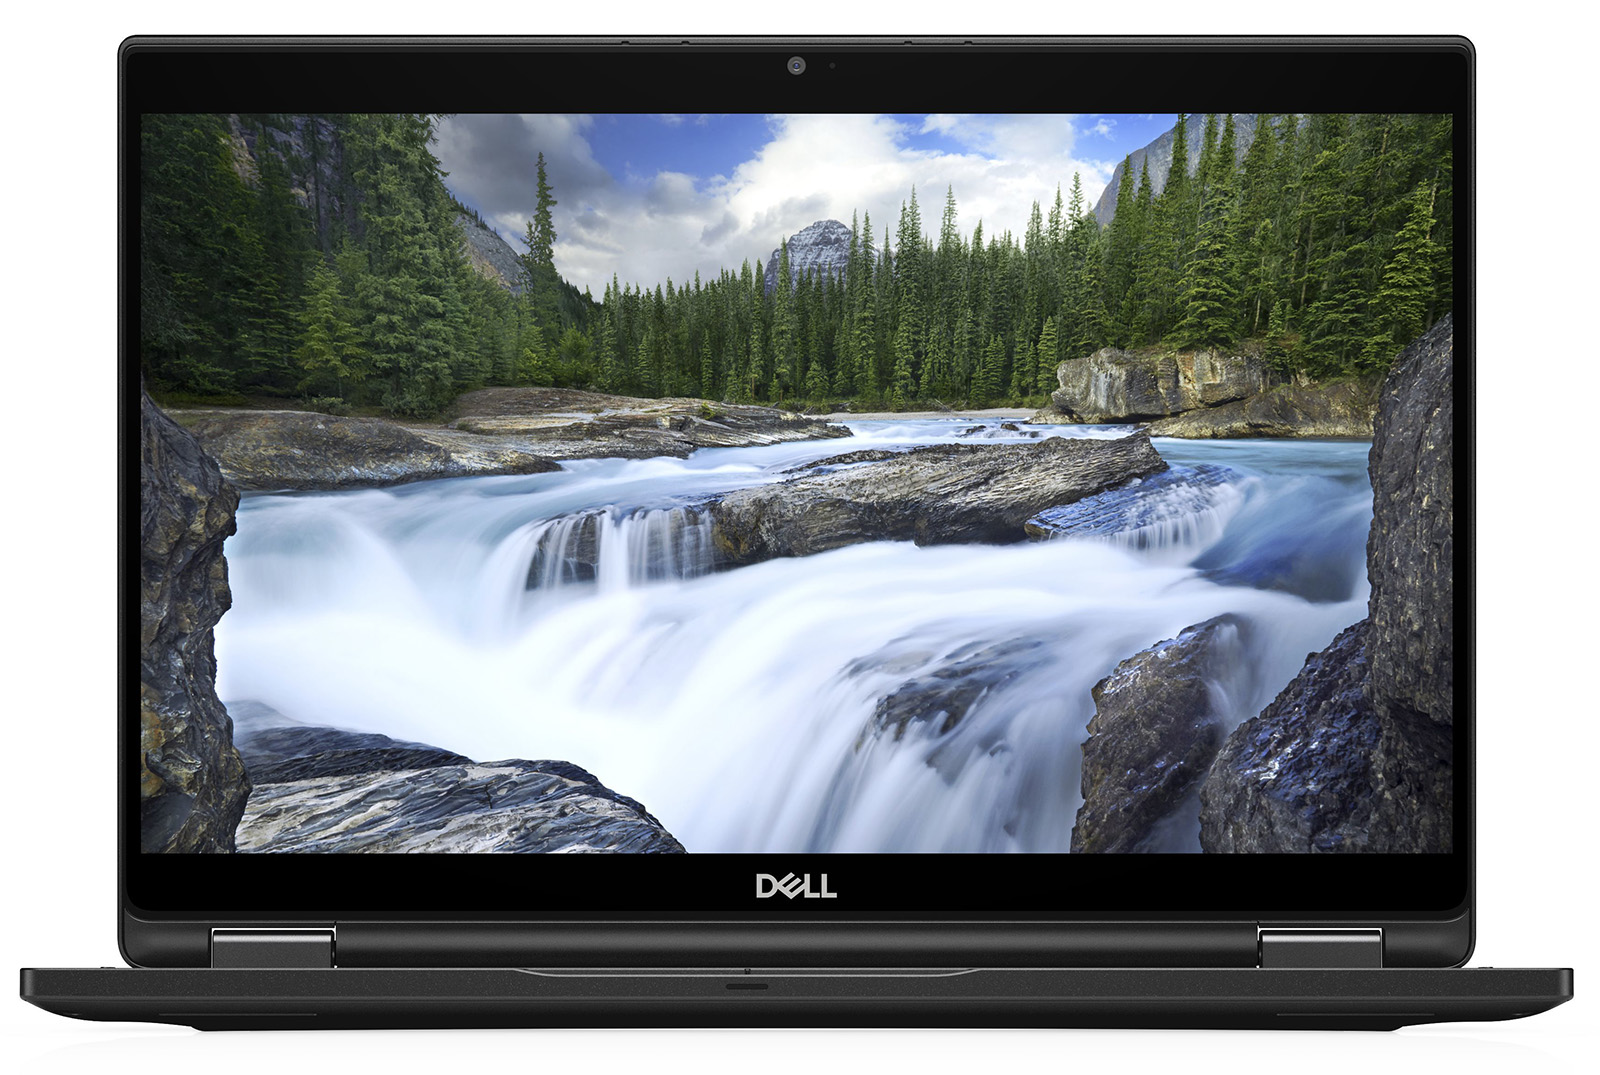 Dell Latitude 13 7390 (2-in-1) - Specs, Tests, and Prices